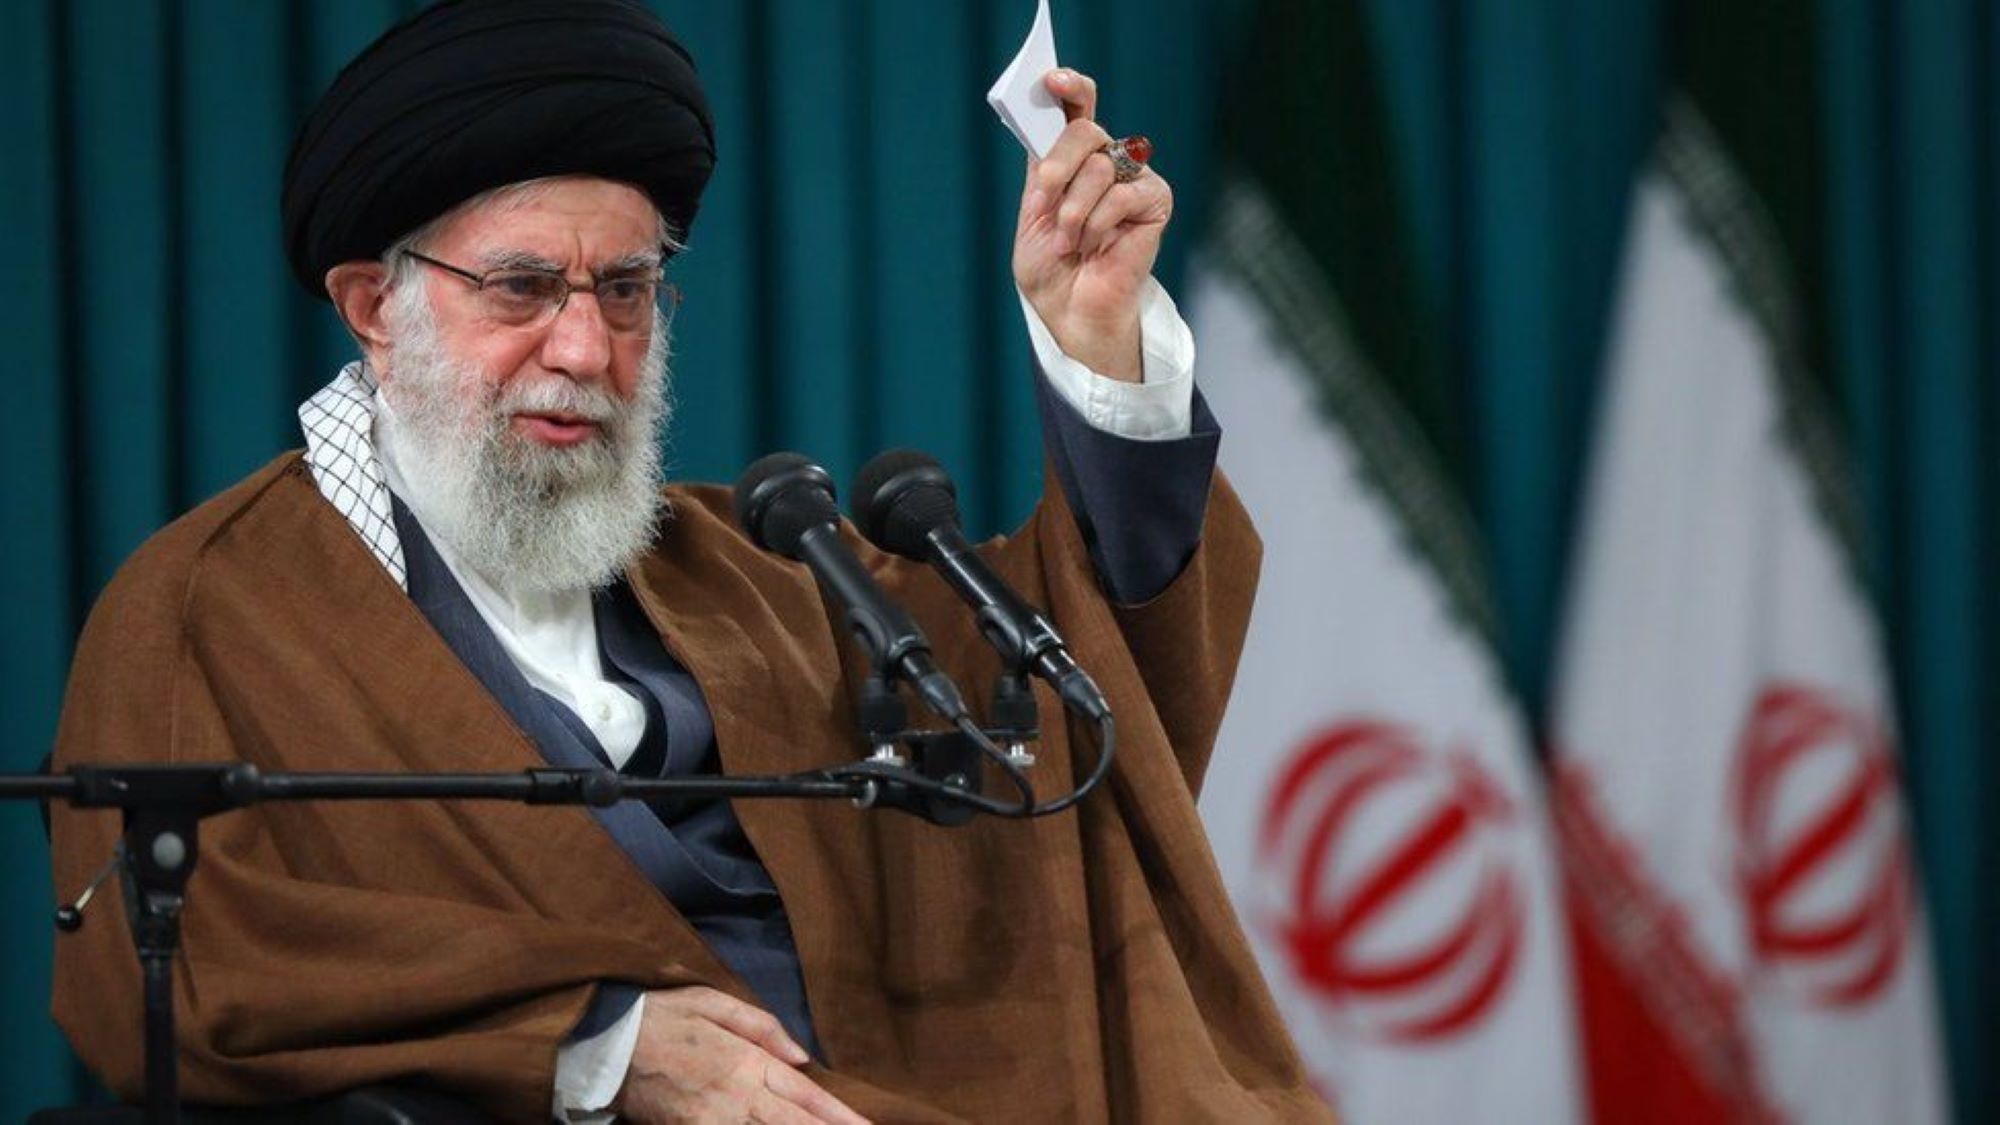 Iranian Supreme Leader Khamenei sits on a stage with two Iranian flags in the background, speaking into a microphone and holding up a small piece of paper in his left hand, which has a large amber coloured ring on the middle finger